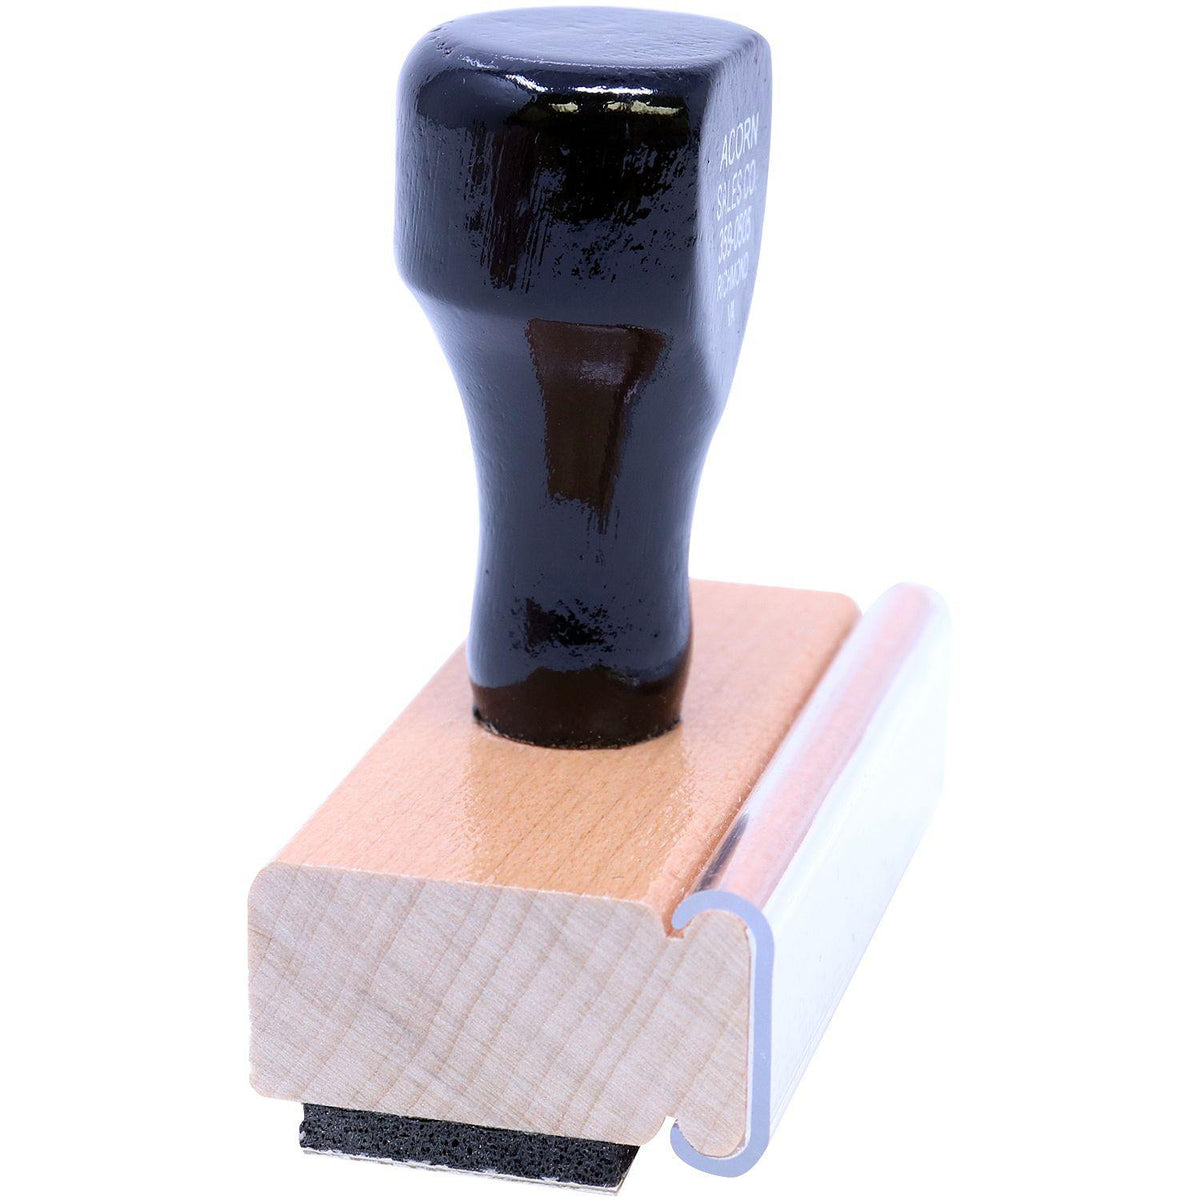 Side View of Large Received Without Contents Rubber Stamp at an Angle